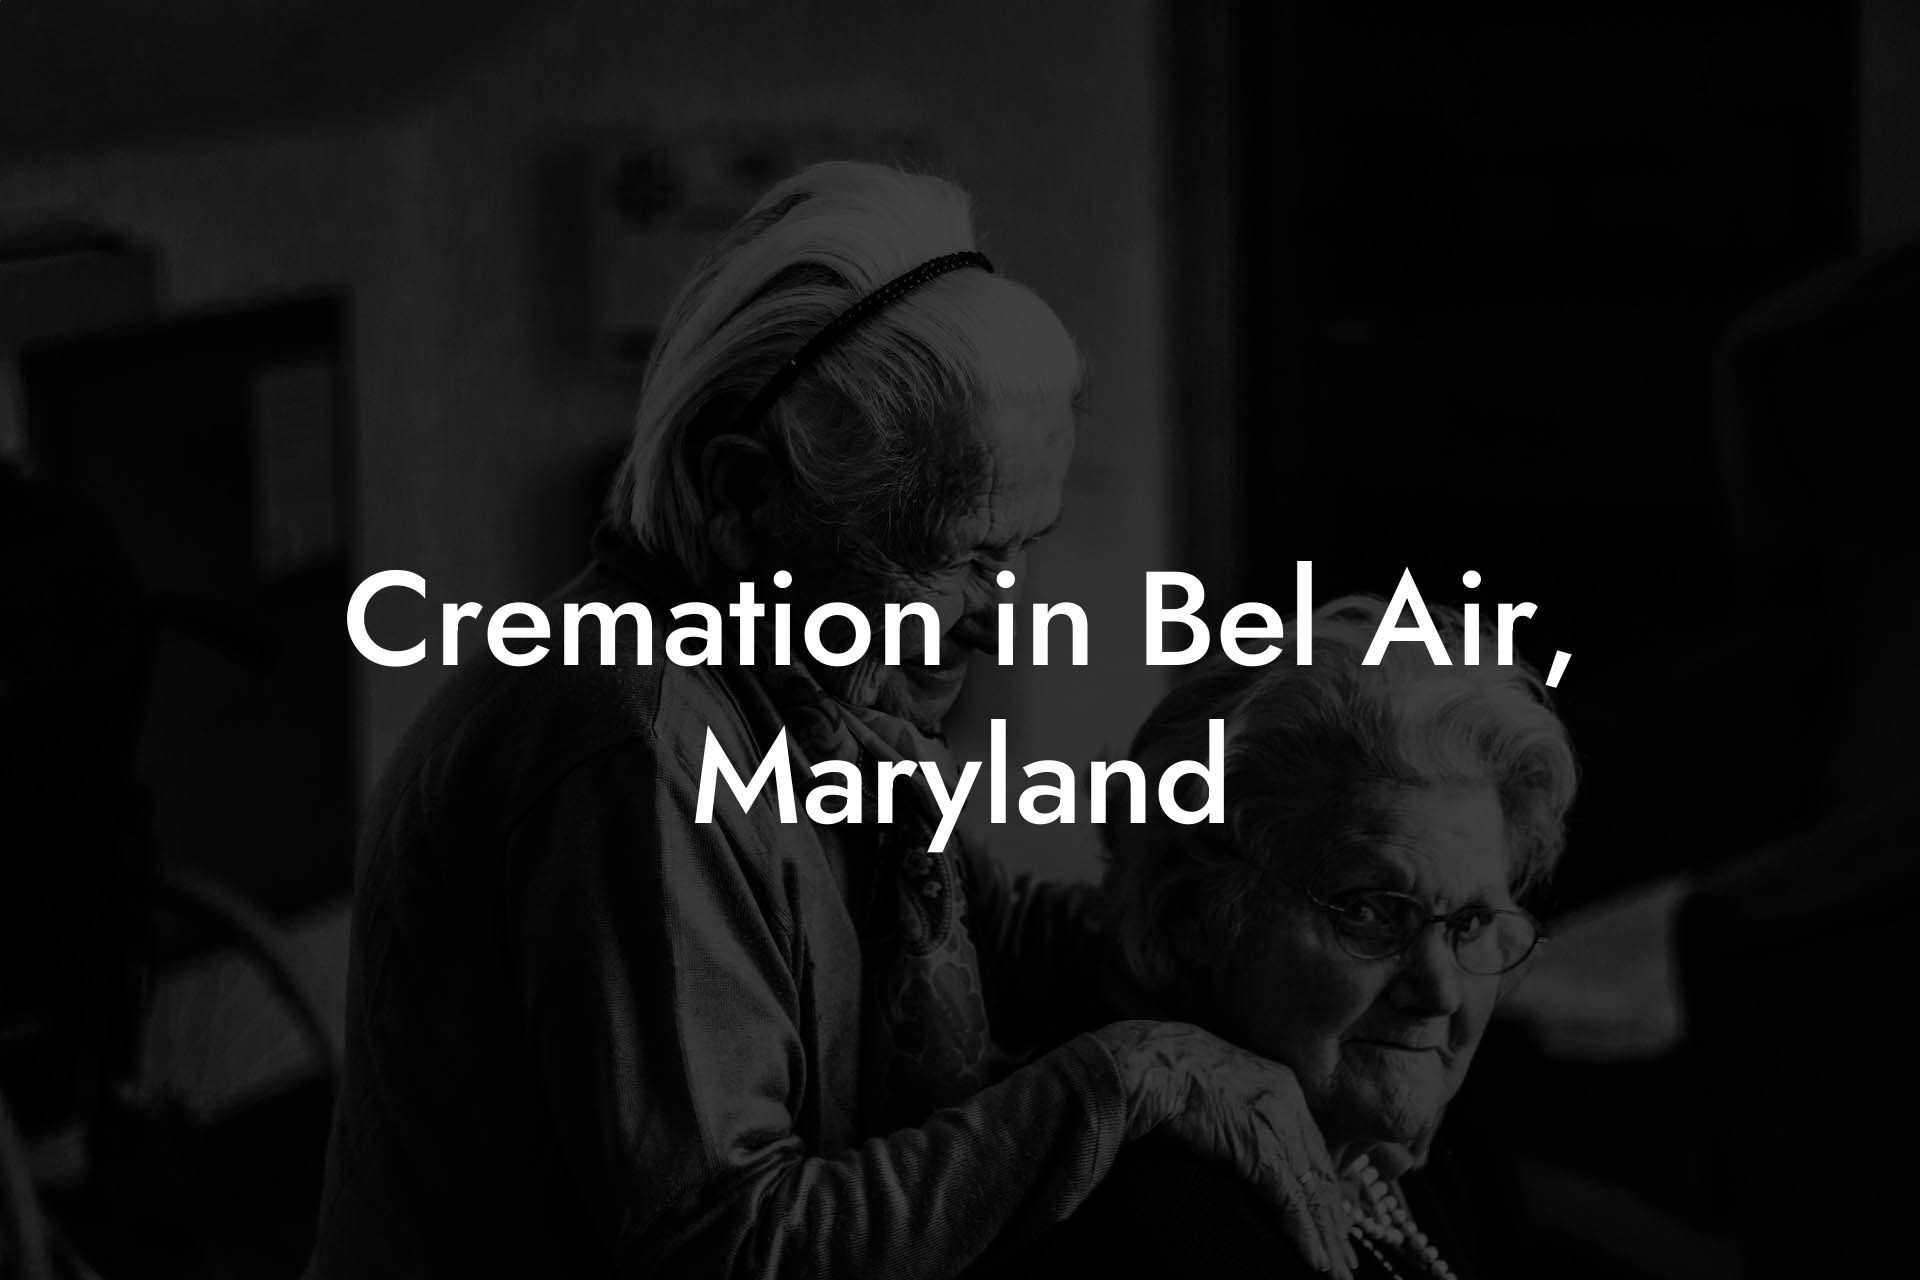 Cremation in Bel Air, Maryland